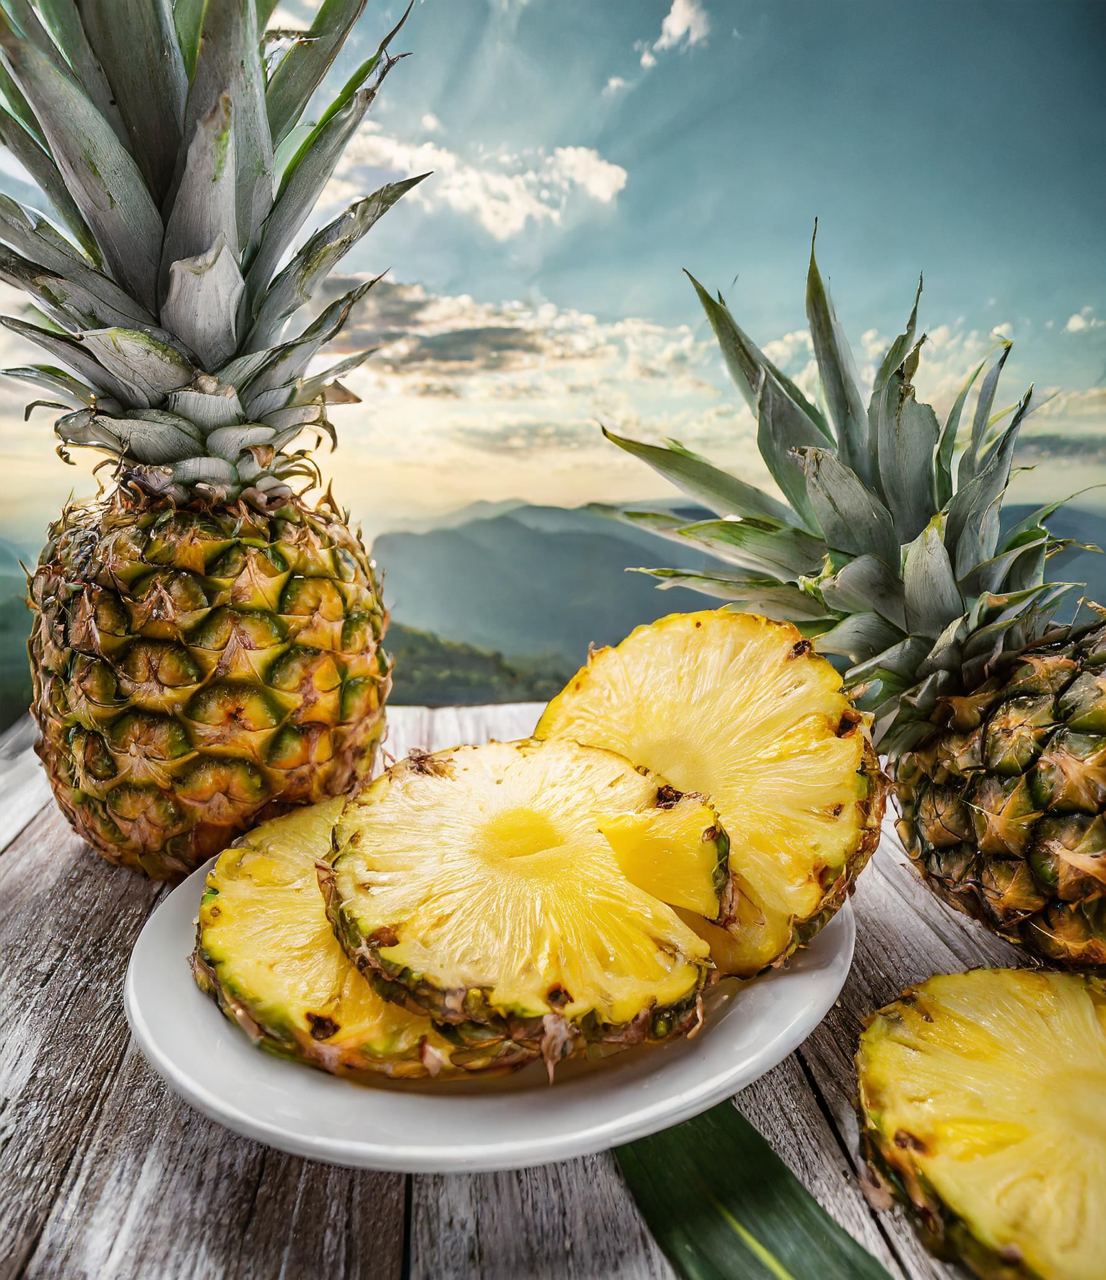 Sliced pineapple on a chopping board, ready to eat